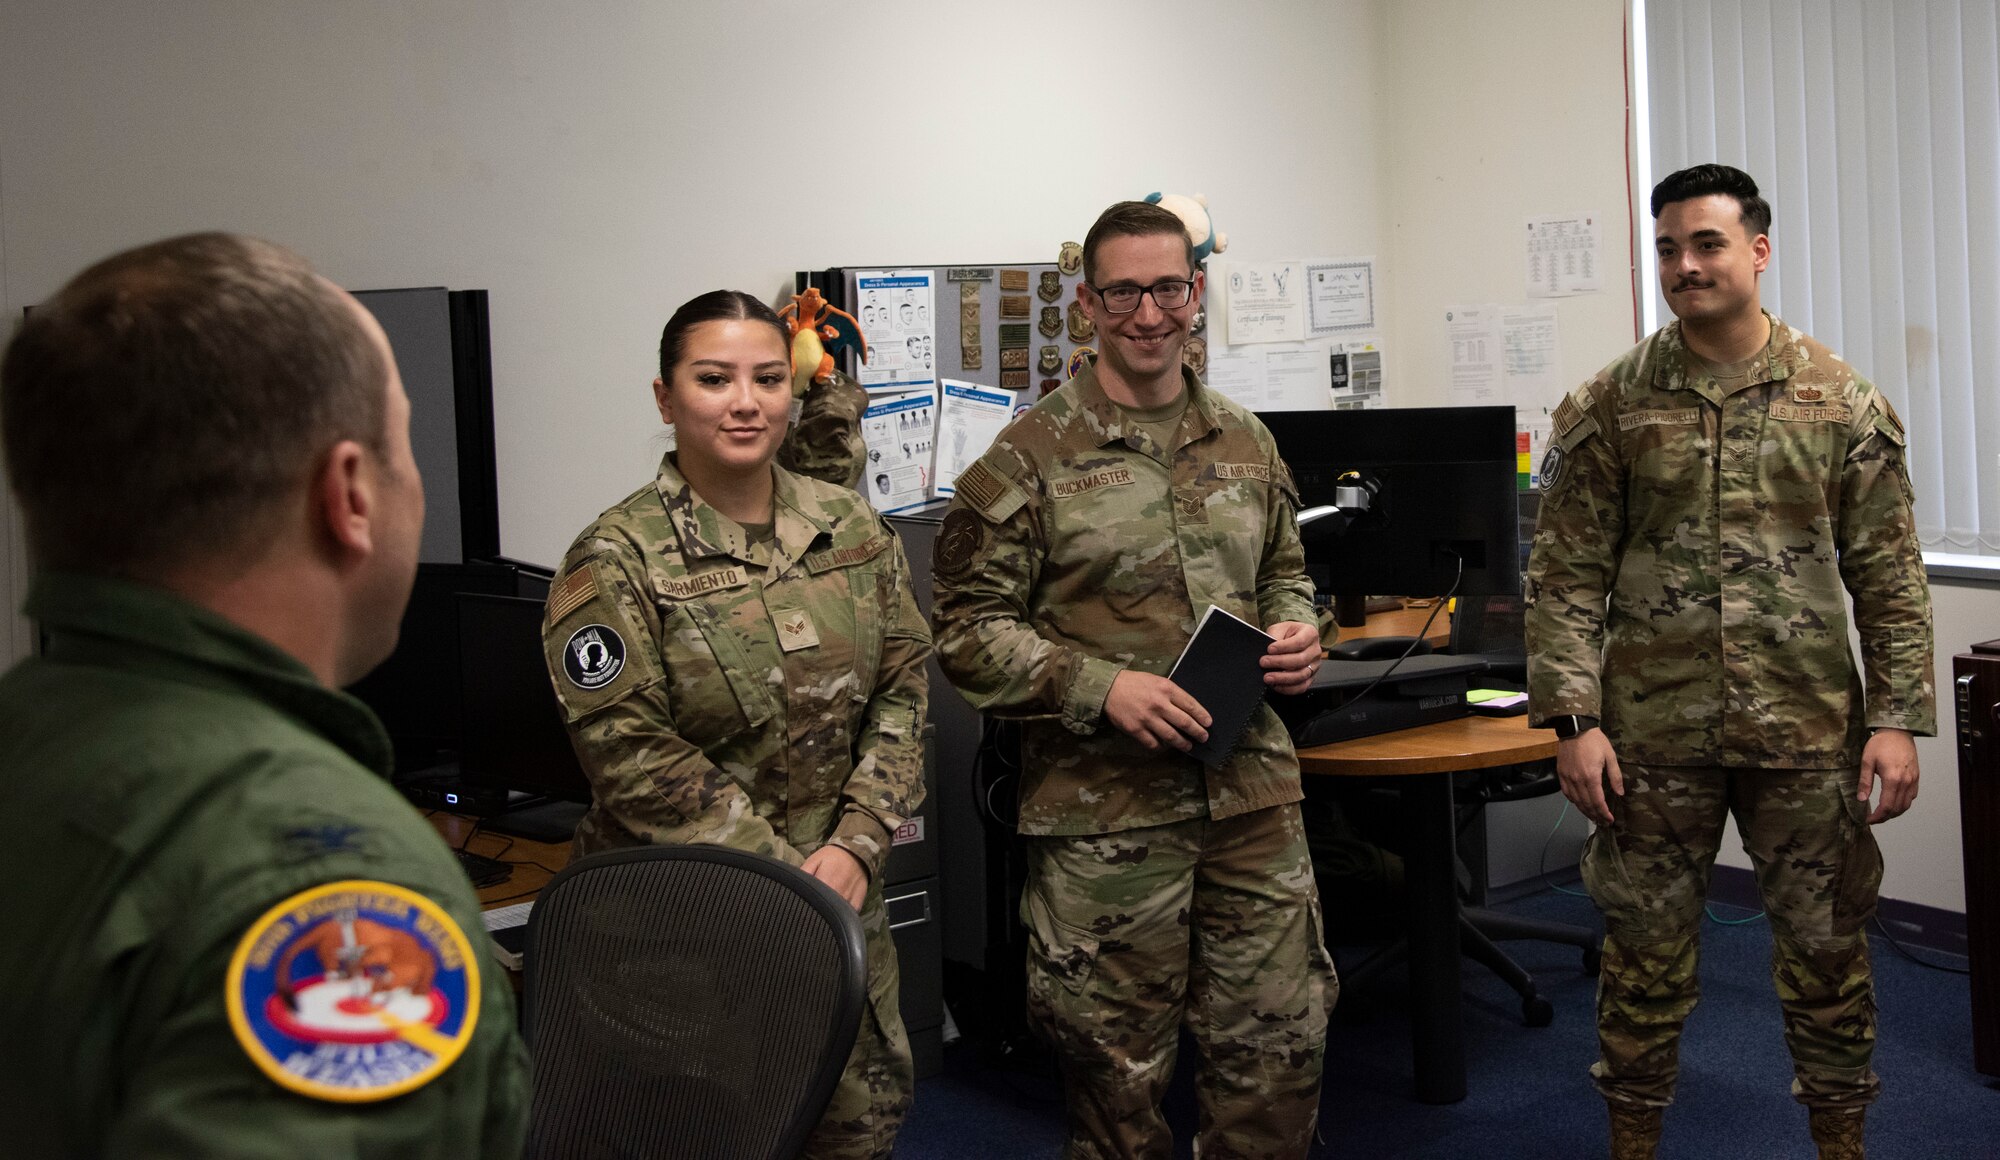 Military members talk to each other in an office